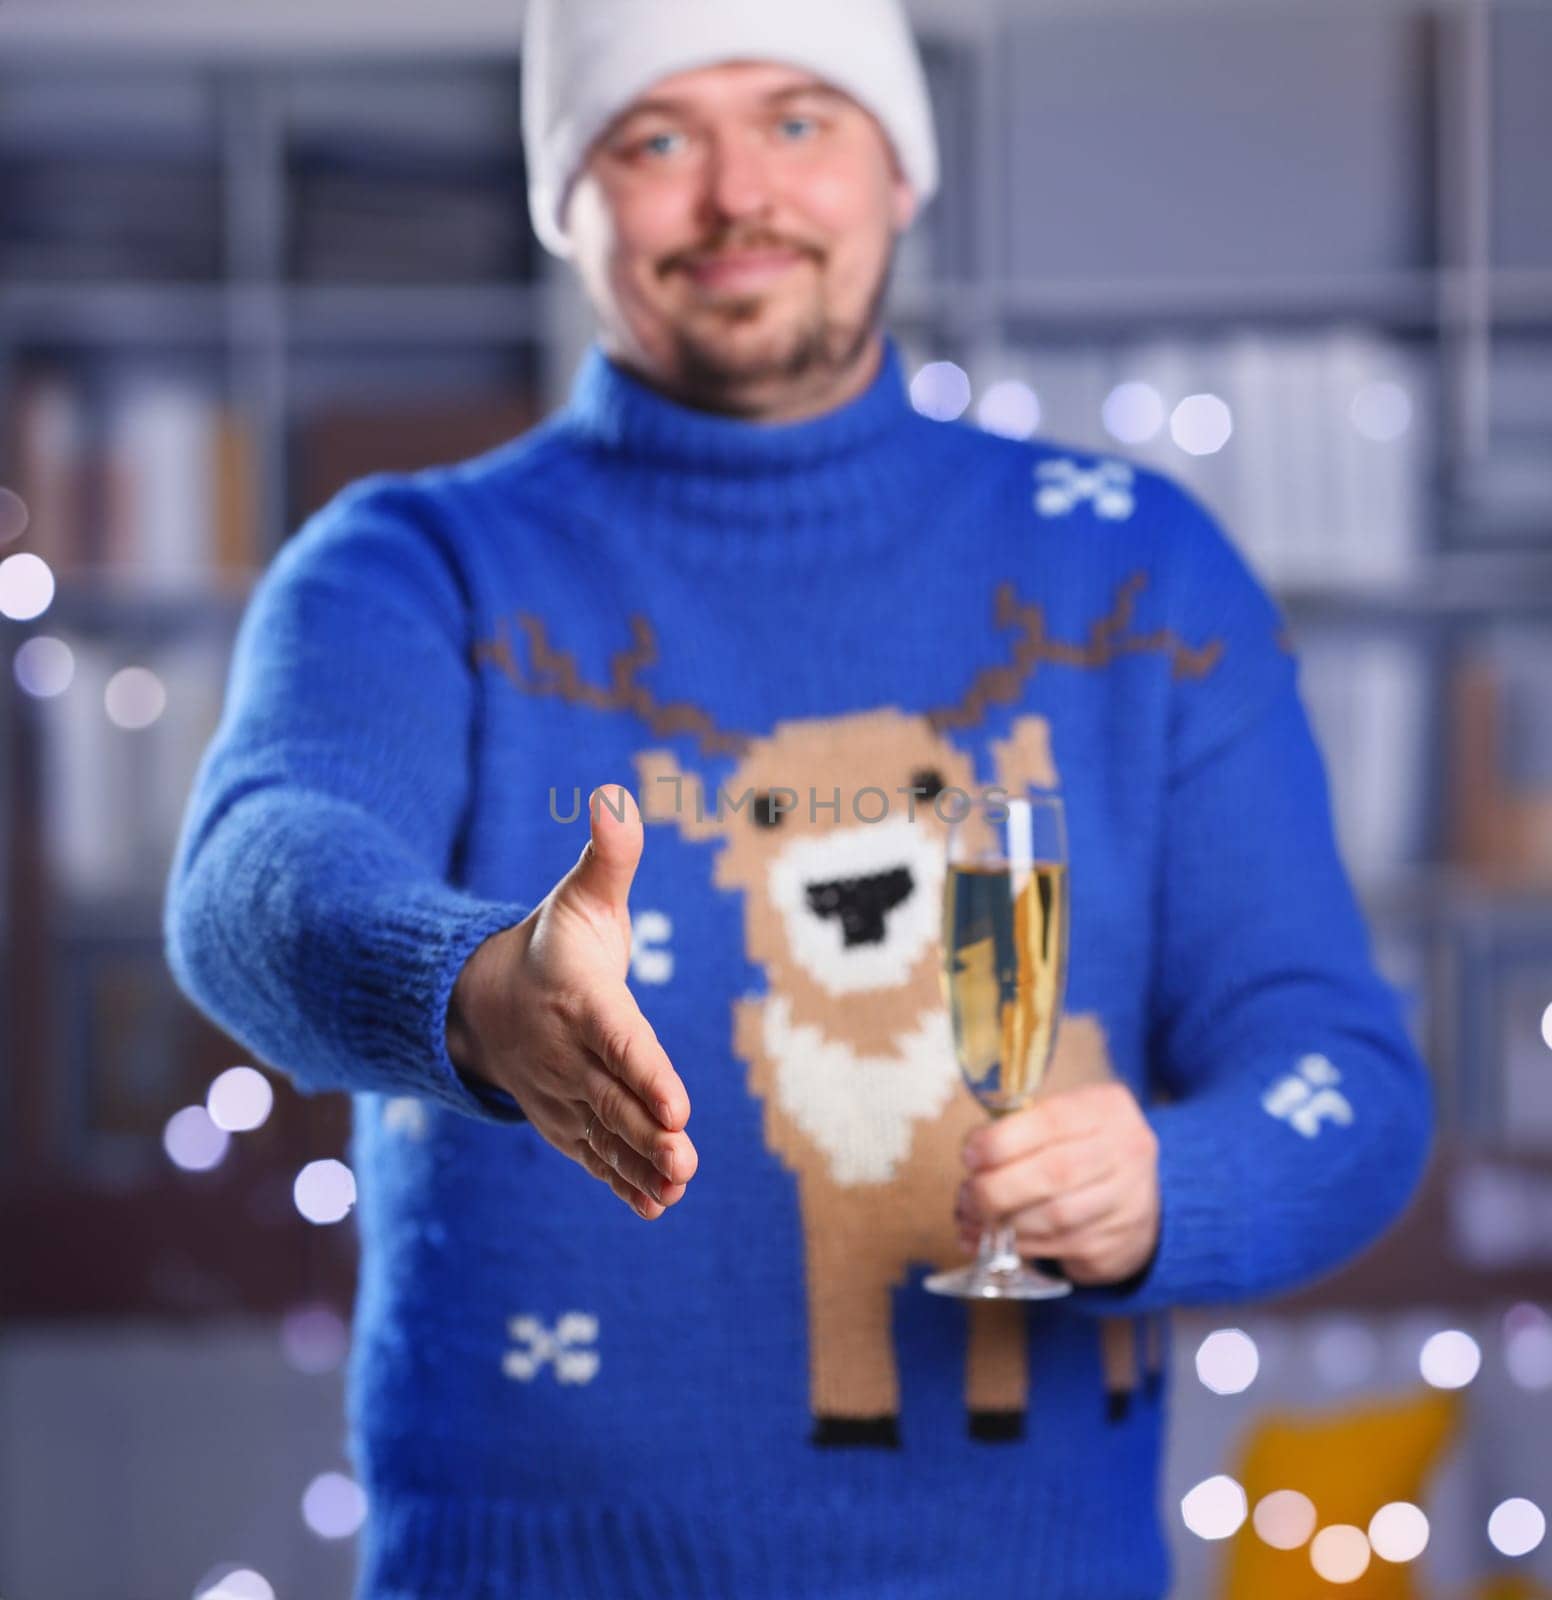 Man wearing warm blue deer sweater hold in arm champagne goblet give arm as hello in office with glowing garland in background closeup. Positive friend welcome strike bargain approval mediation offer